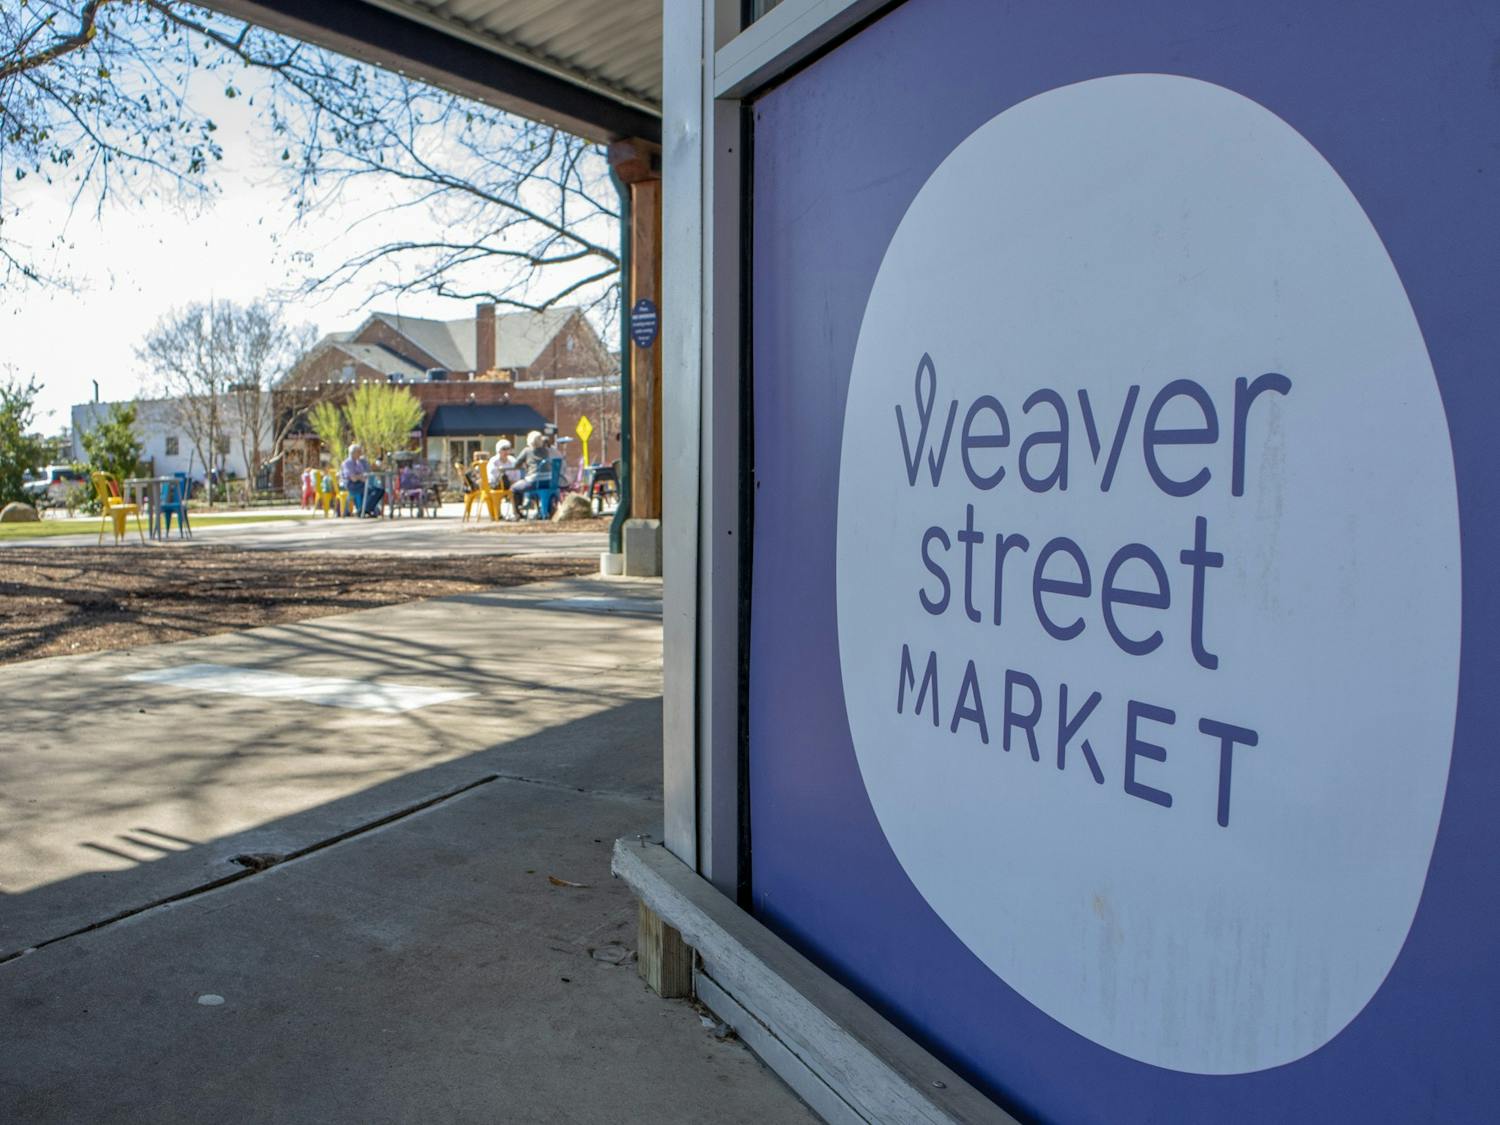 Weaver Street Market in Carrboro is pictured on Tuesday, March 7, 2023.